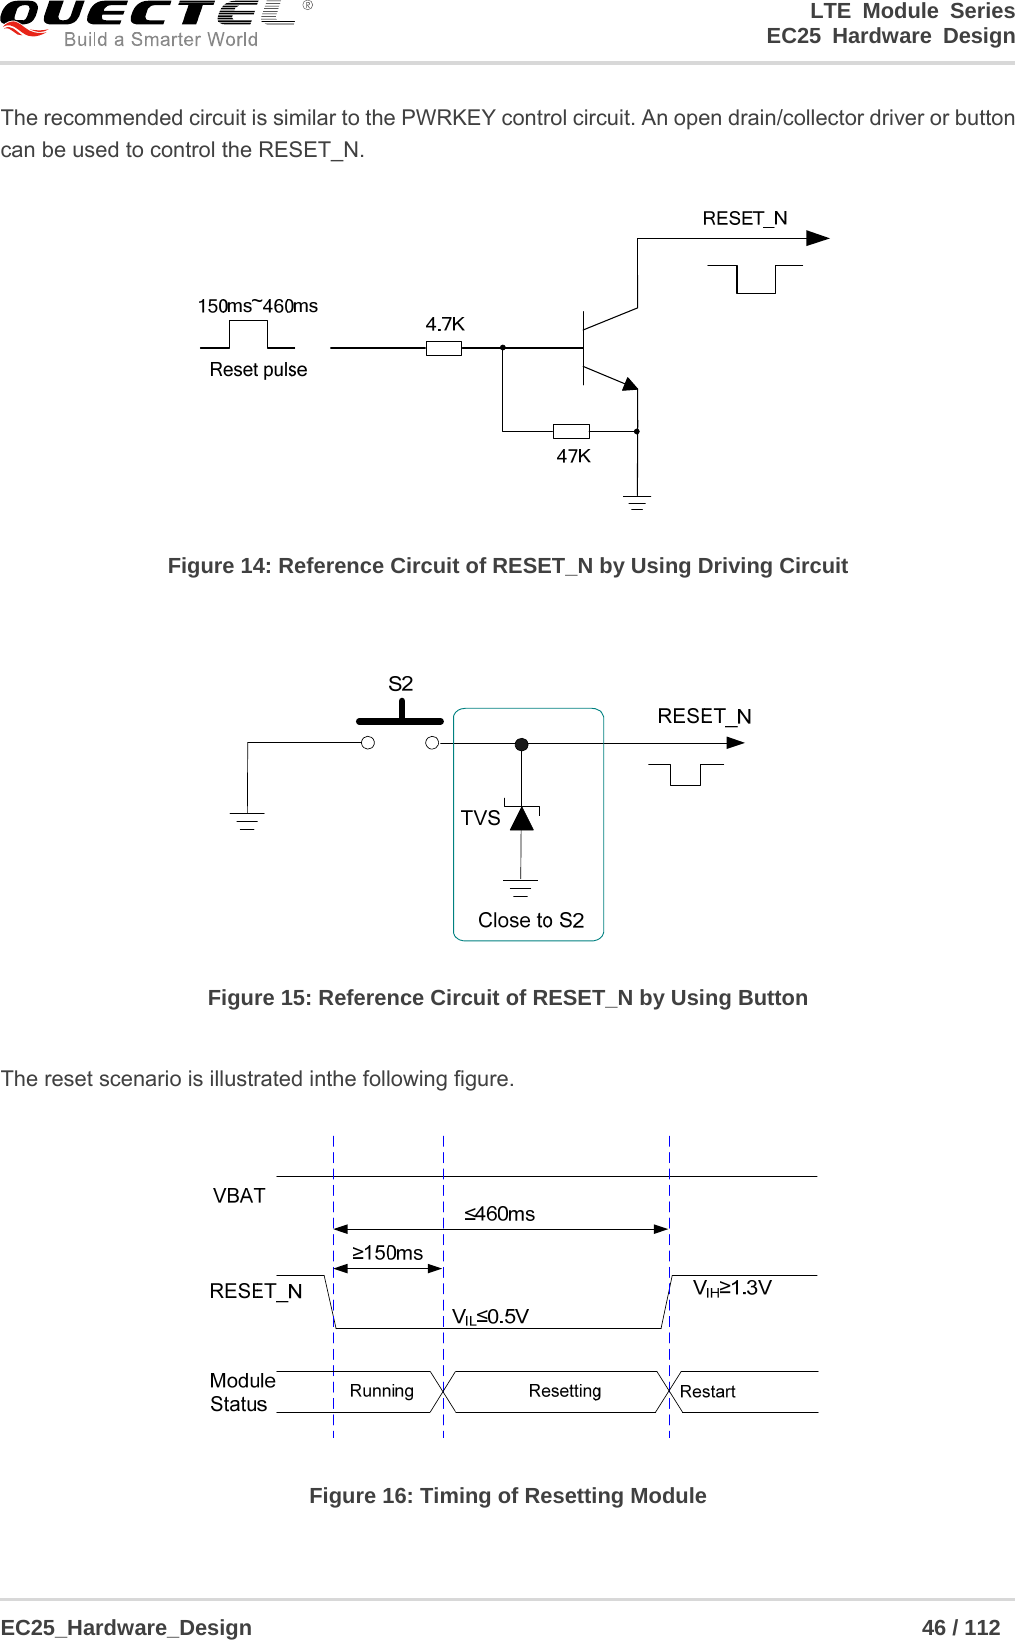 LTE Module Series                                                  EC25 Hardware Design  EC25_Hardware_Design                                                             46 / 112    The recommended circuit is similar to the PWRKEY control circuit. An open drain/collector driver or button can be used to control the RESET_N.  Figure 14: Reference Circuit of RESET_N by Using Driving Circuit   Figure 15: Reference Circuit of RESET_N by Using Button  The reset scenario is illustrated inthe following figure.  Figure 16: Timing of Resetting Module 